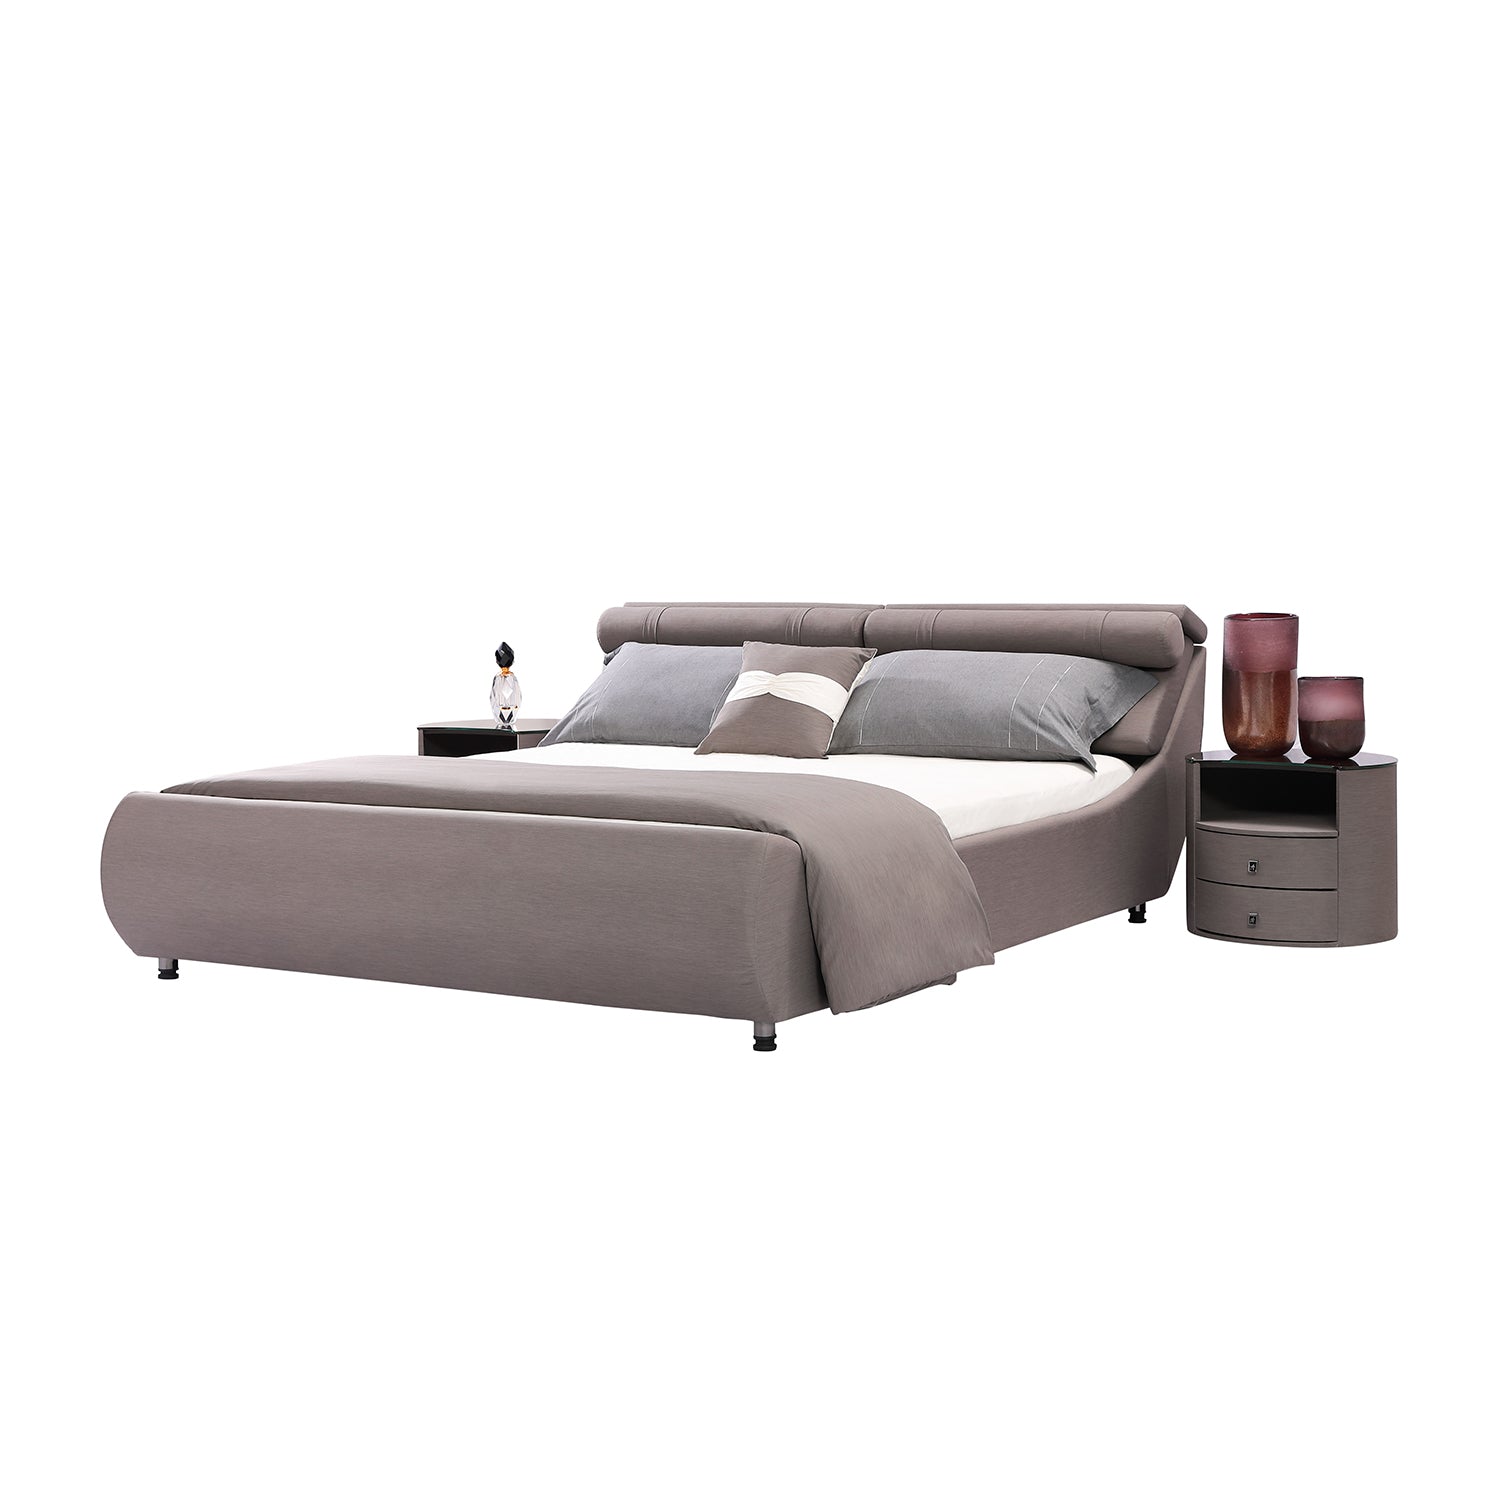 DeRUCCI Bed Frame BZZ4 - 093C with upholstered headboard, modern gray bedding, and matching round nightstands with decorative vases and sculpture